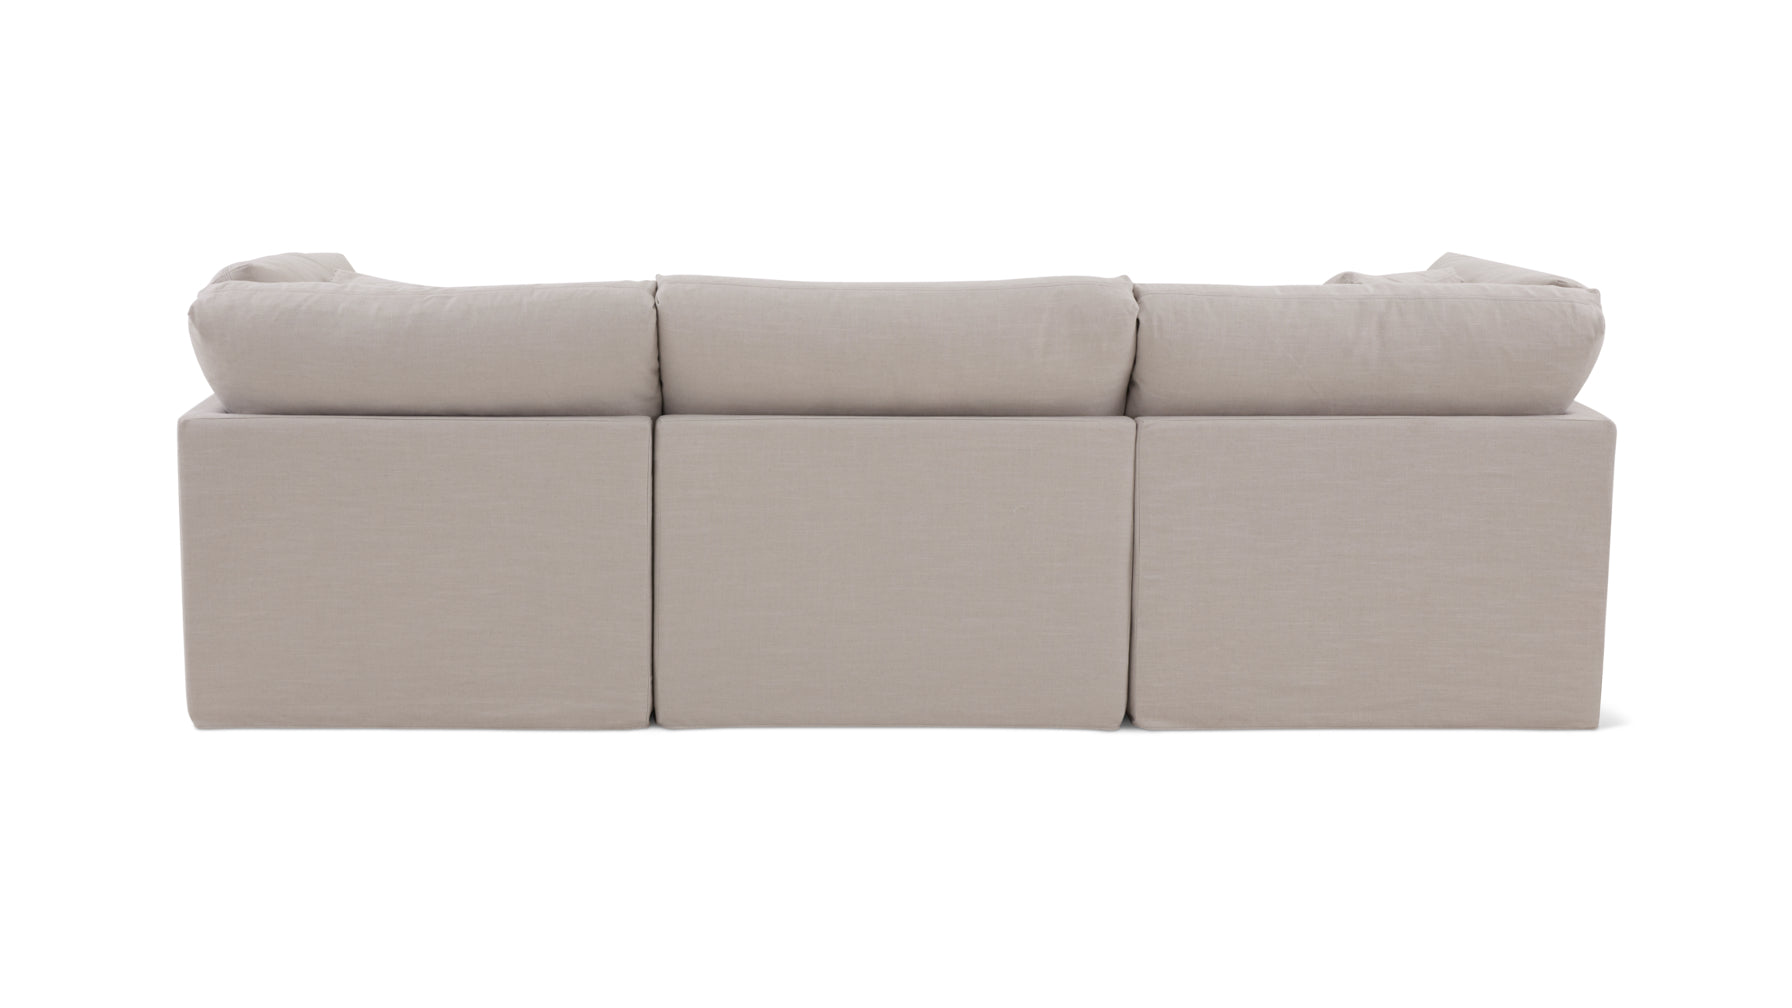 Get Together™ 5-Piece Modular U-Shaped Sectional, Standard, Clay - Image 6